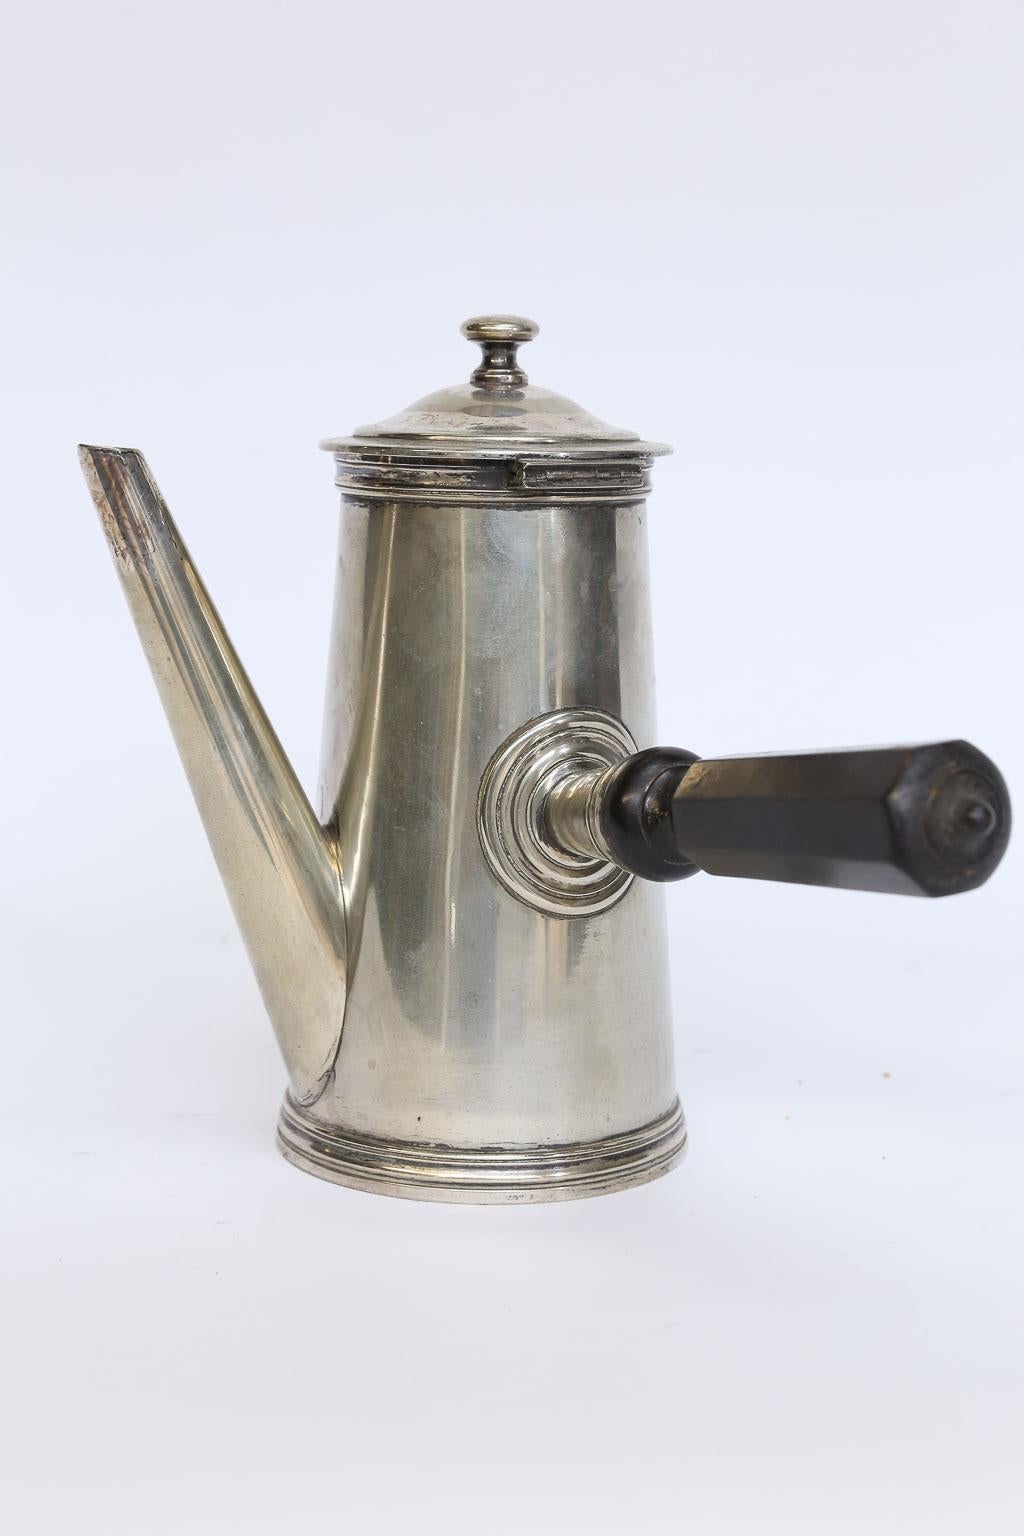 Found in France, this late 19th century hotel silver chocolate has a hinged top and wood handle to keep hands cool while serving hot chocolate. Marked on the bottom with the numbers 10 72794 and 3 hallmarks.